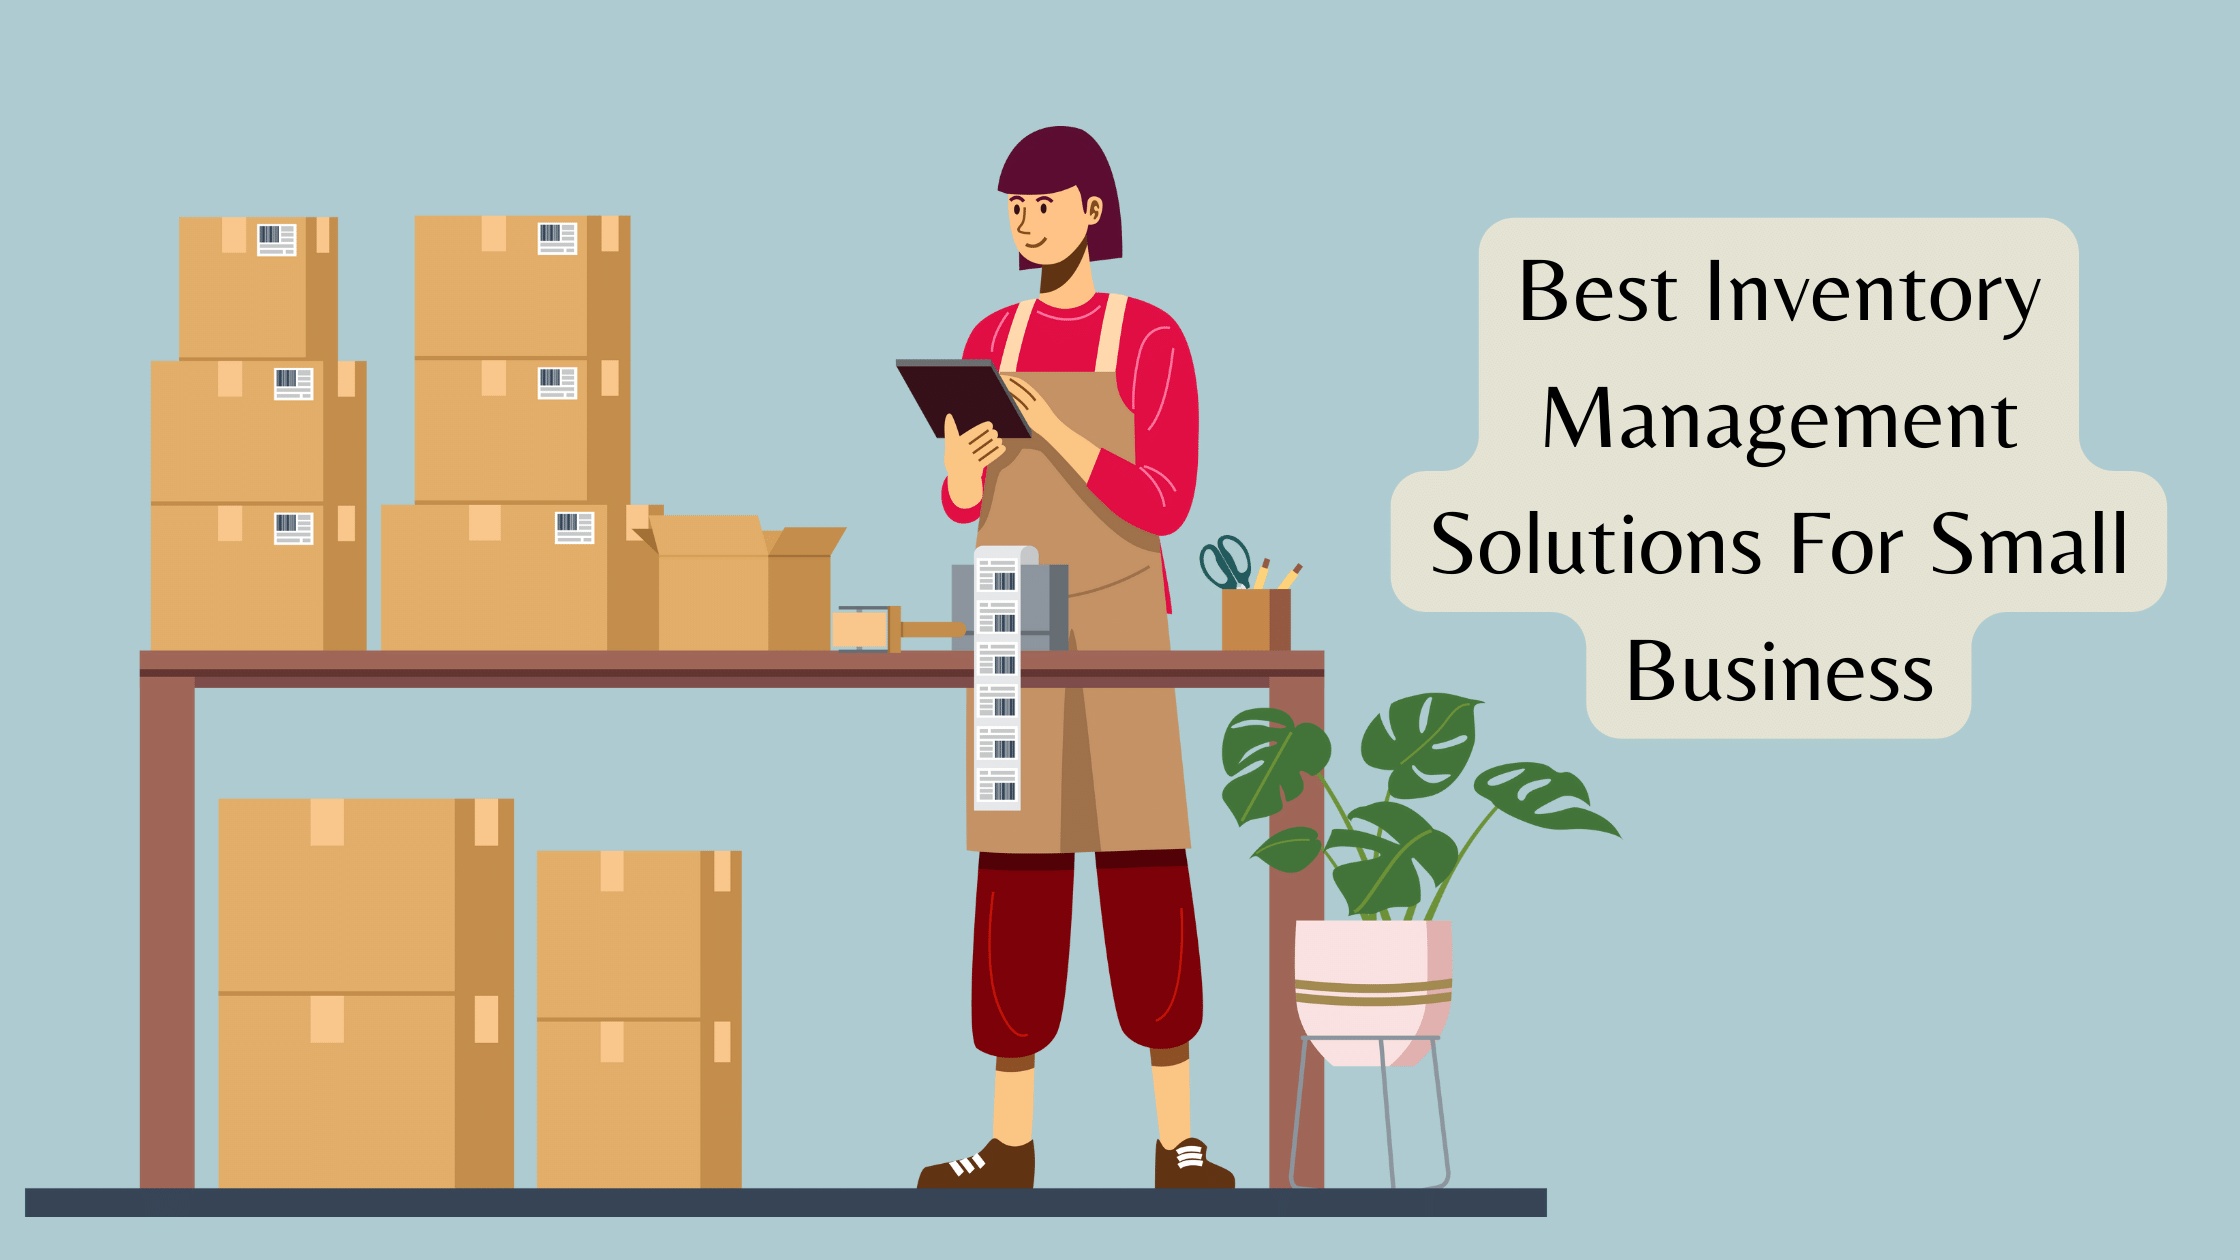 Inventory Management Solutions For Small Business